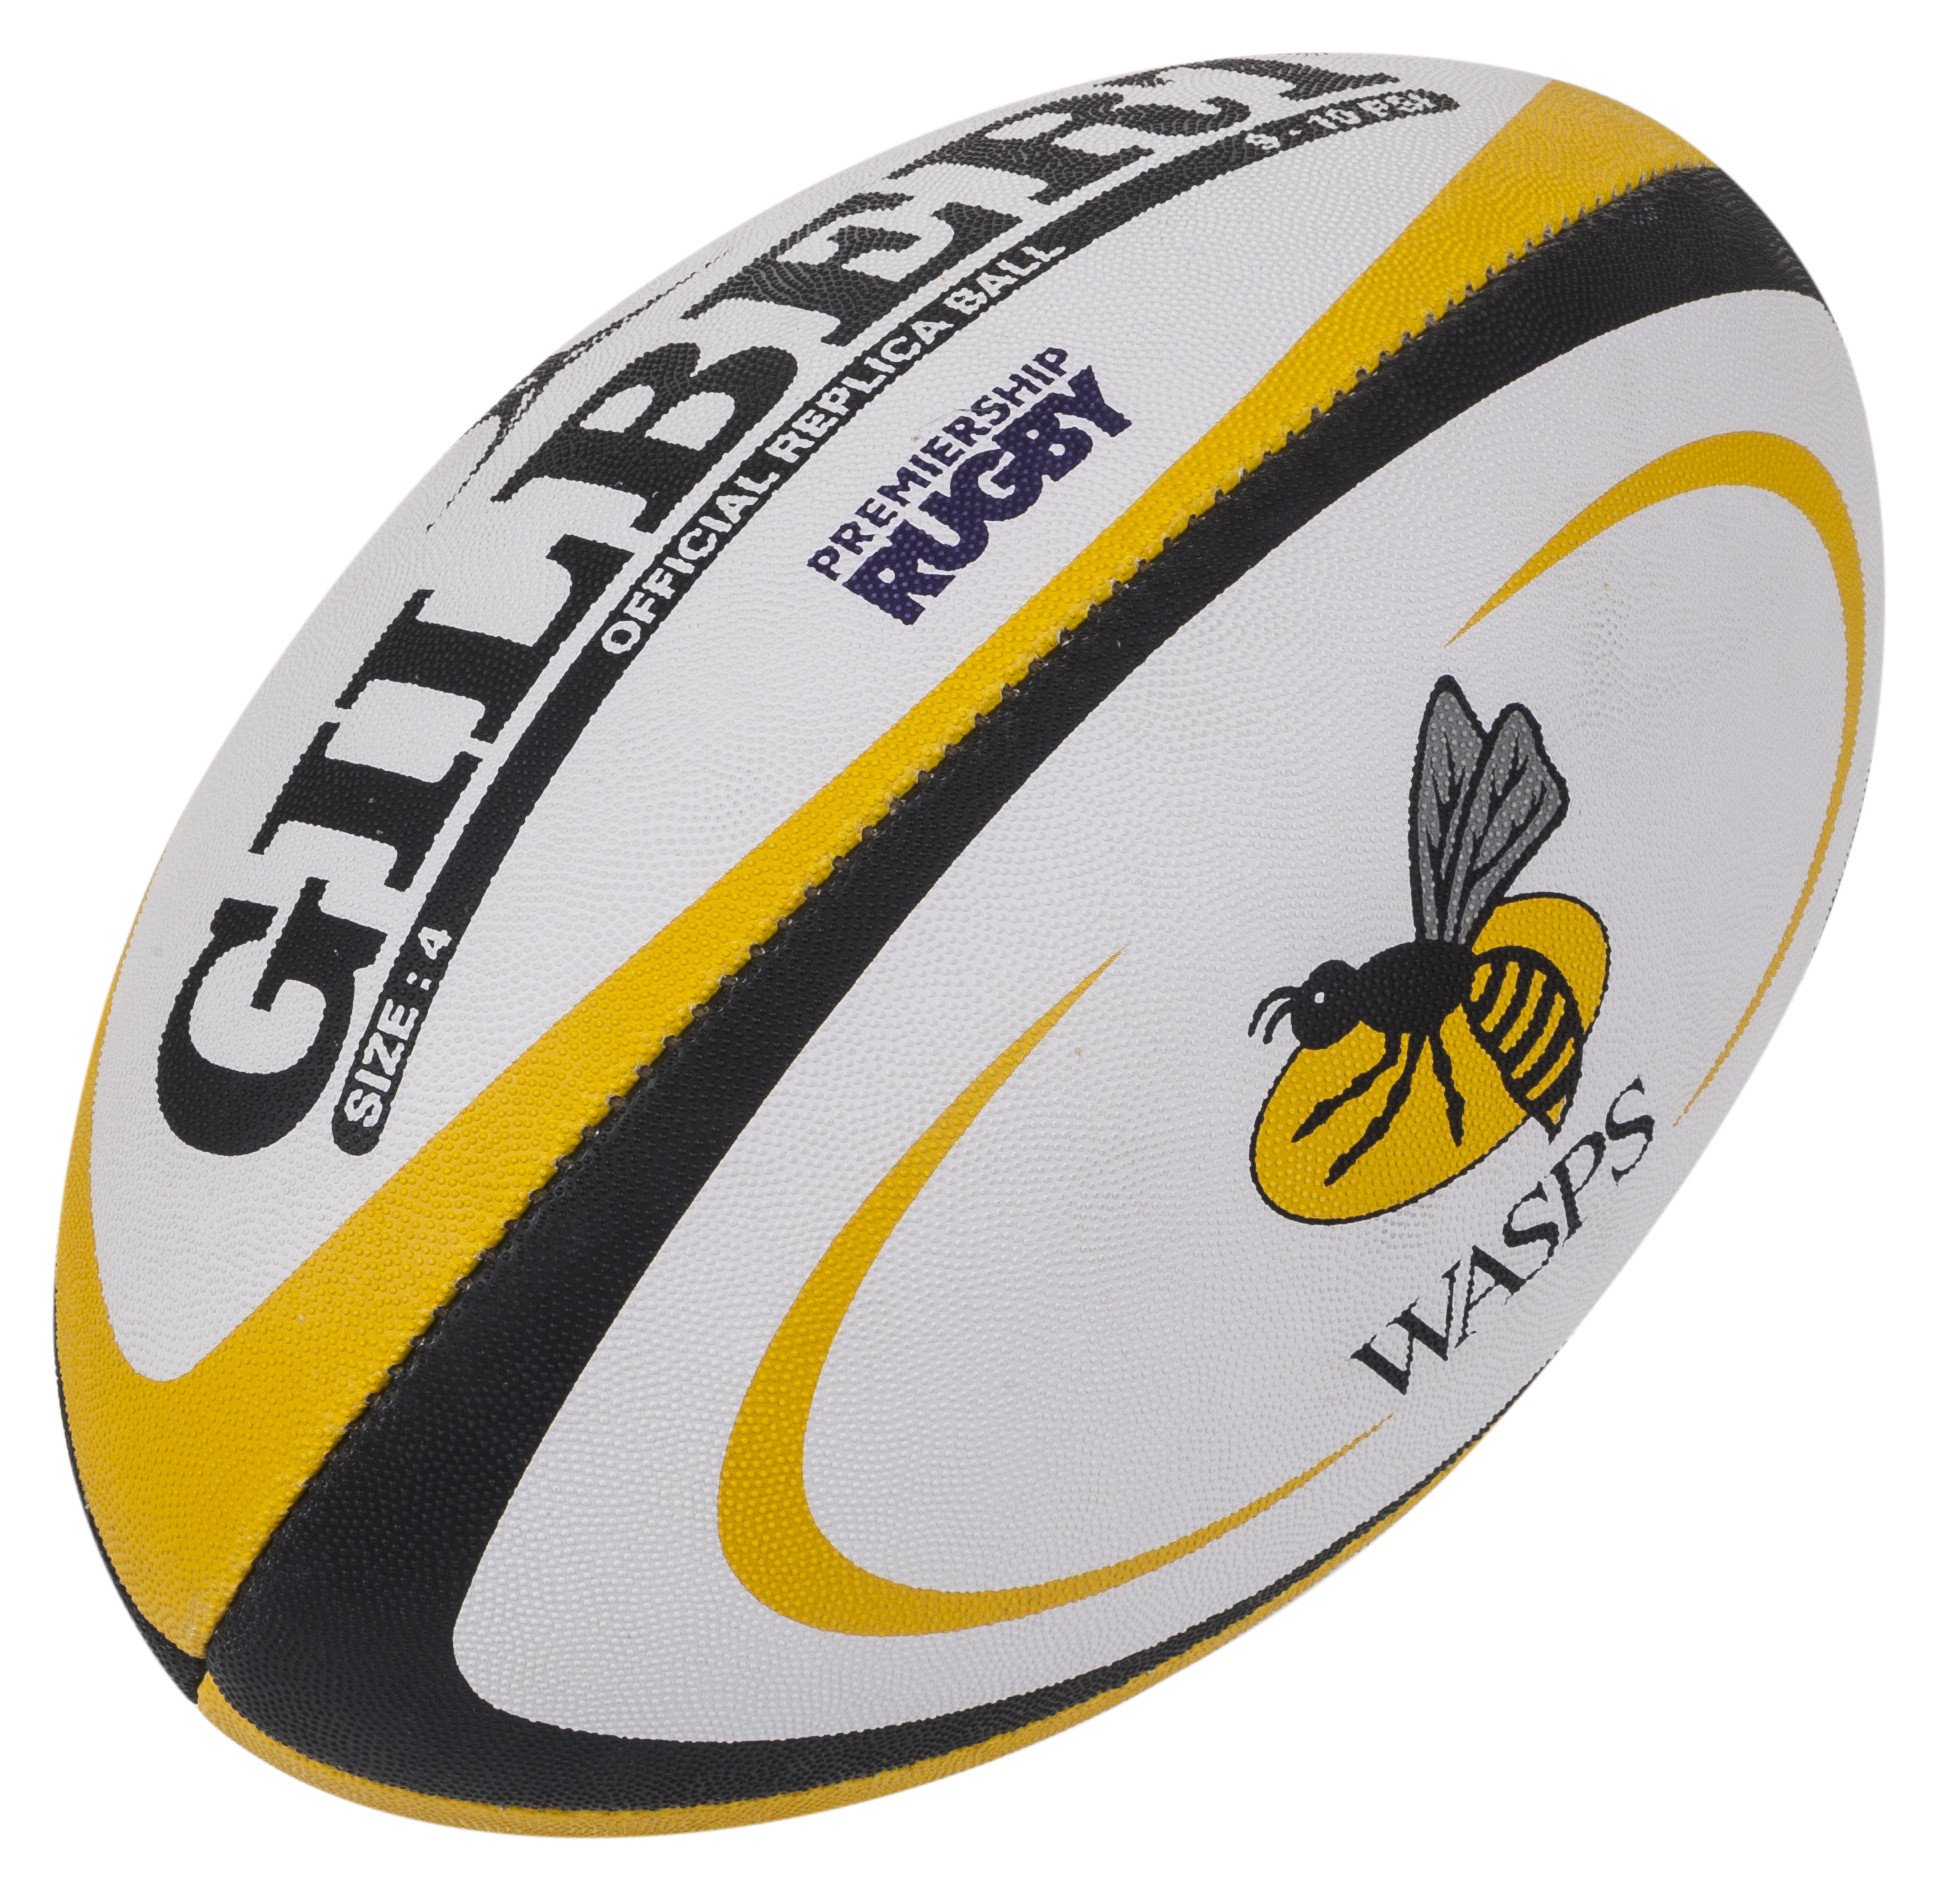 Wasps Official Black Wasps Rugby Ball Keyring - Wasps Club Store